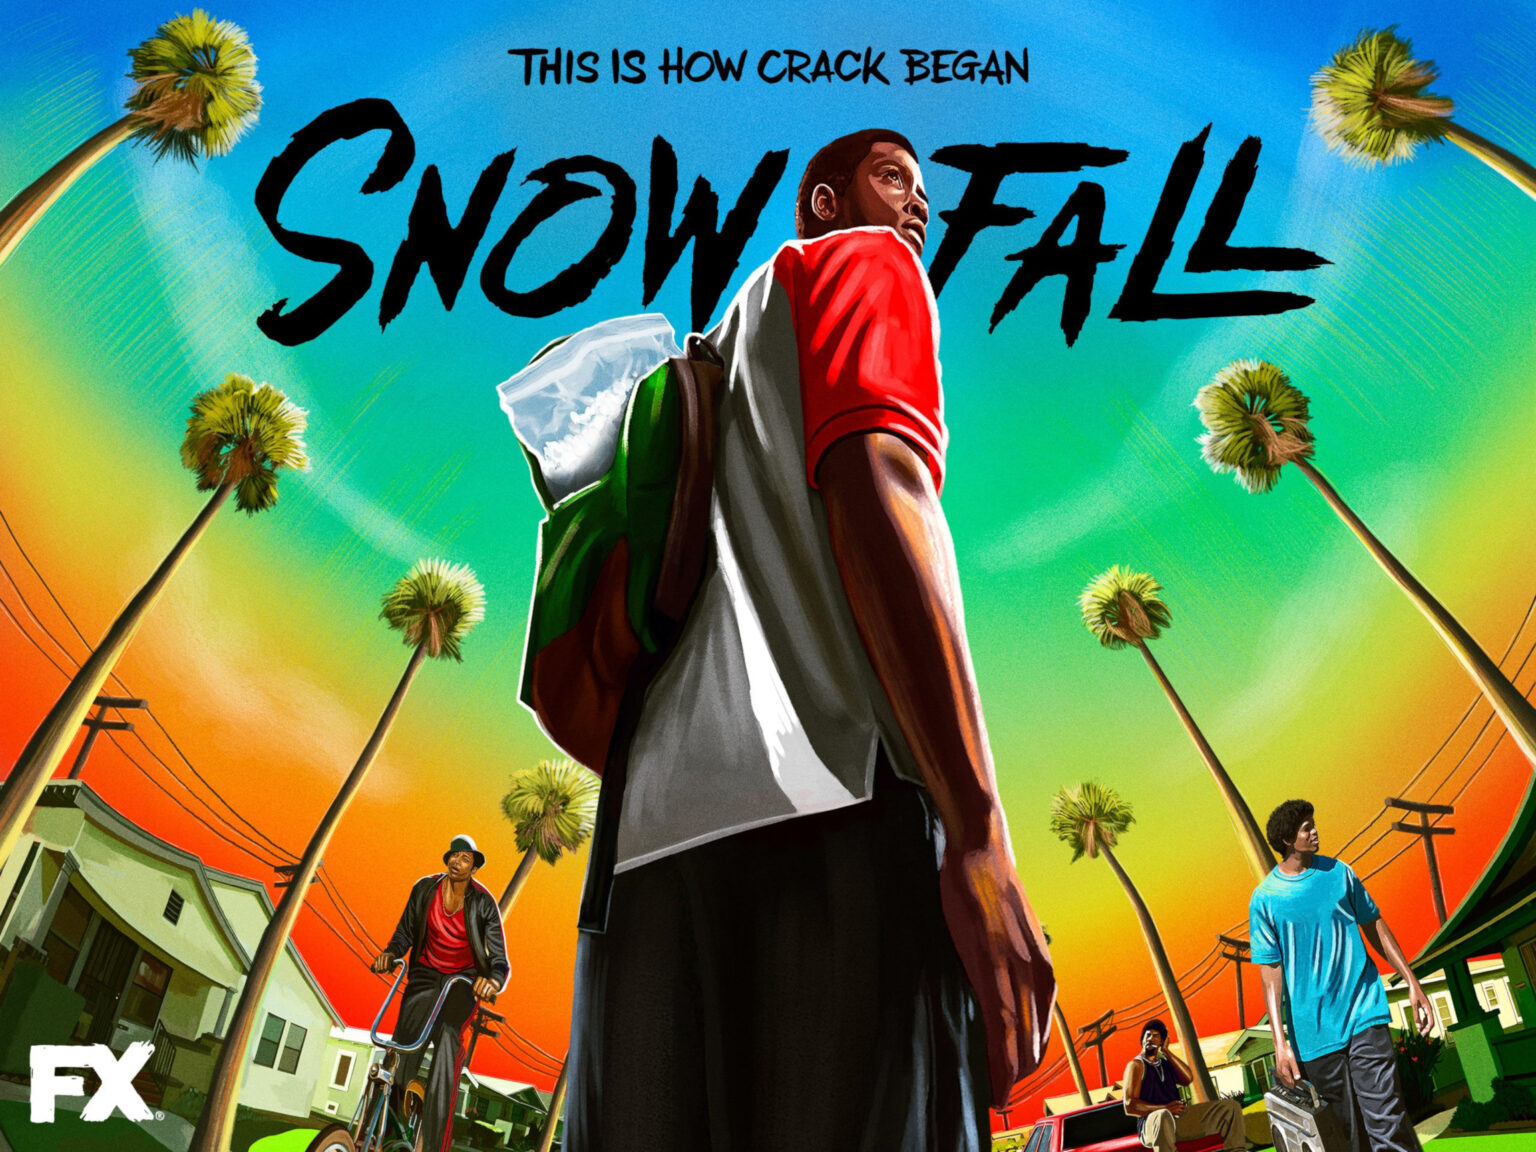 Are you curious about what the cast of 'Snowfall' has been up to? Get the latest updates before season 5 drops on FX.